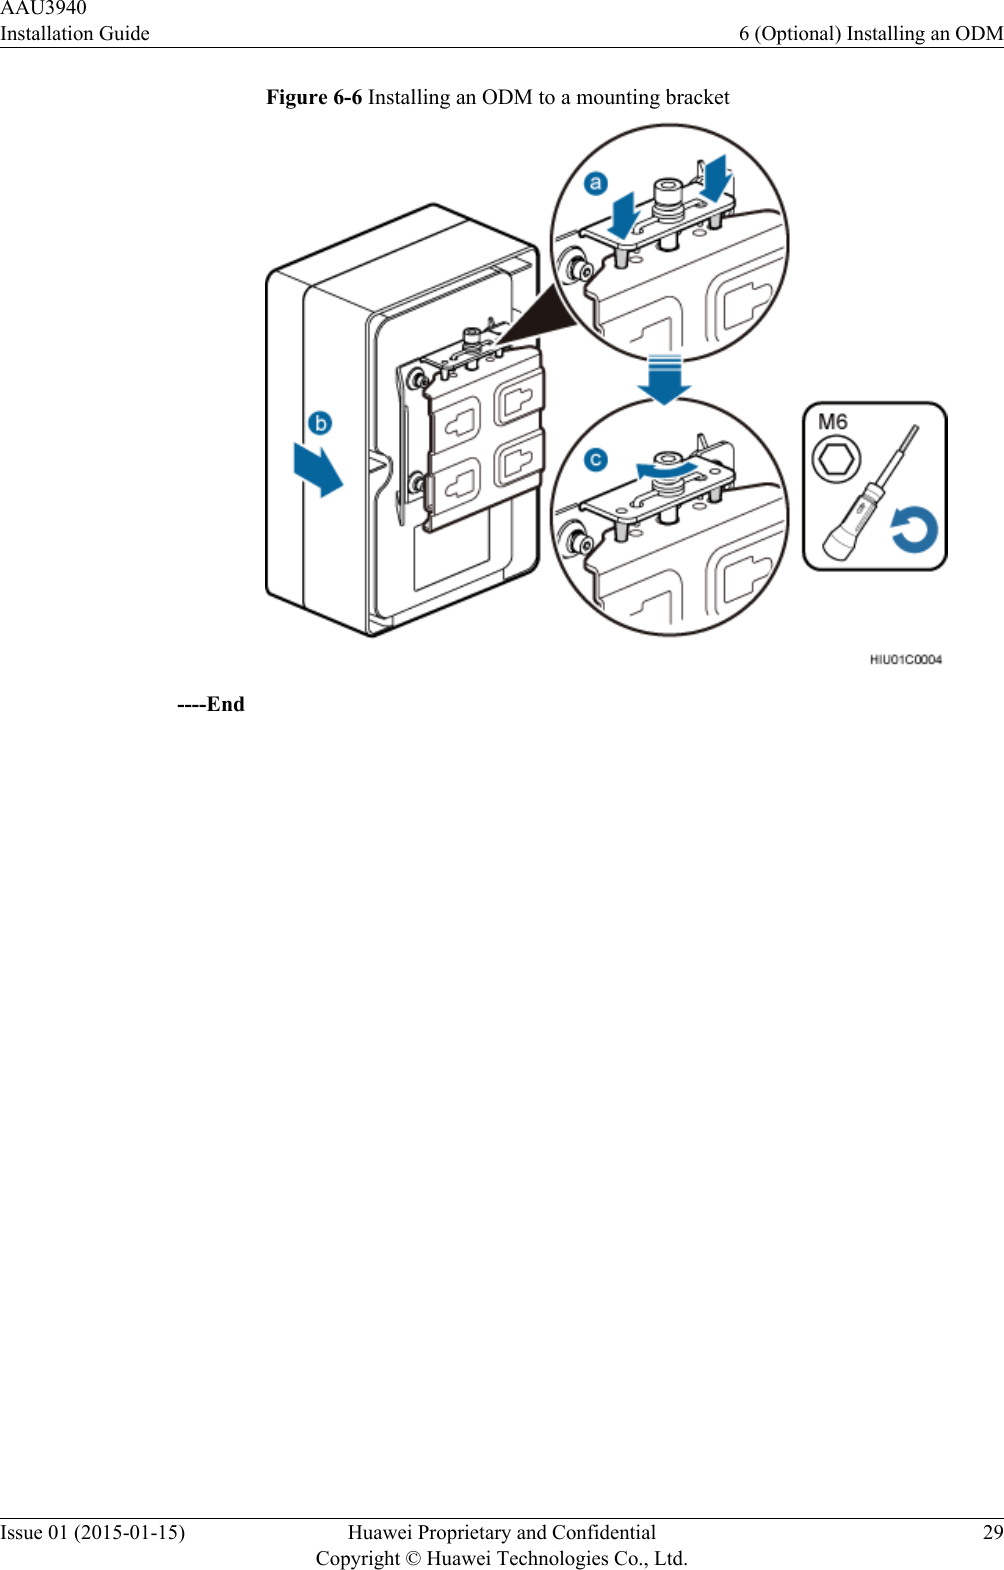 Figure 6-6 Installing an ODM to a mounting bracket----EndAAU3940Installation Guide 6 (Optional) Installing an ODMIssue 01 (2015-01-15) Huawei Proprietary and ConfidentialCopyright © Huawei Technologies Co., Ltd.29